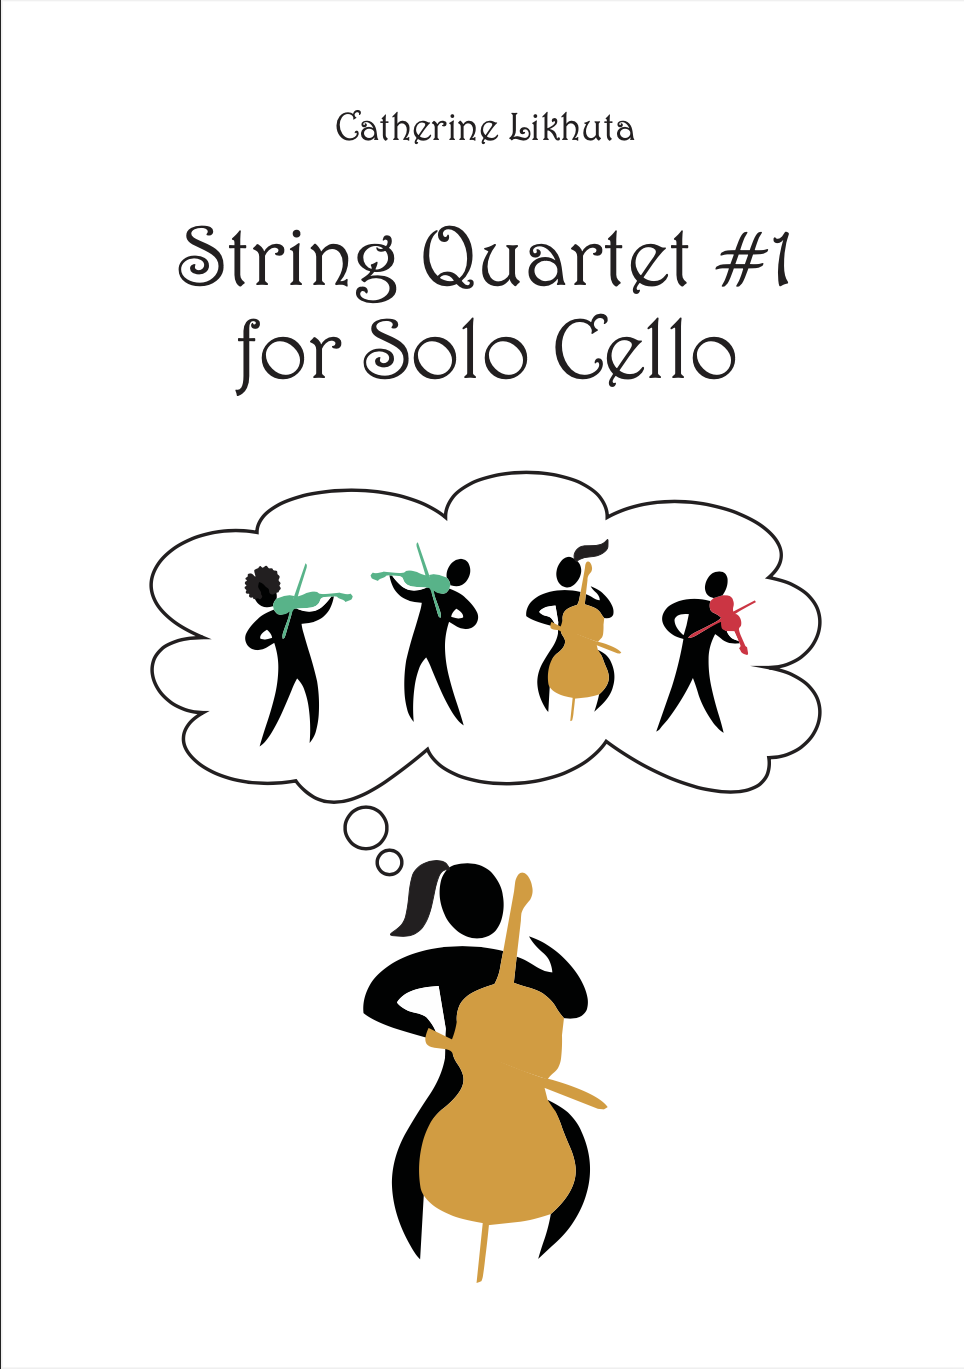 String Quartet #1 For Solo Cello by Catherine Likhuta